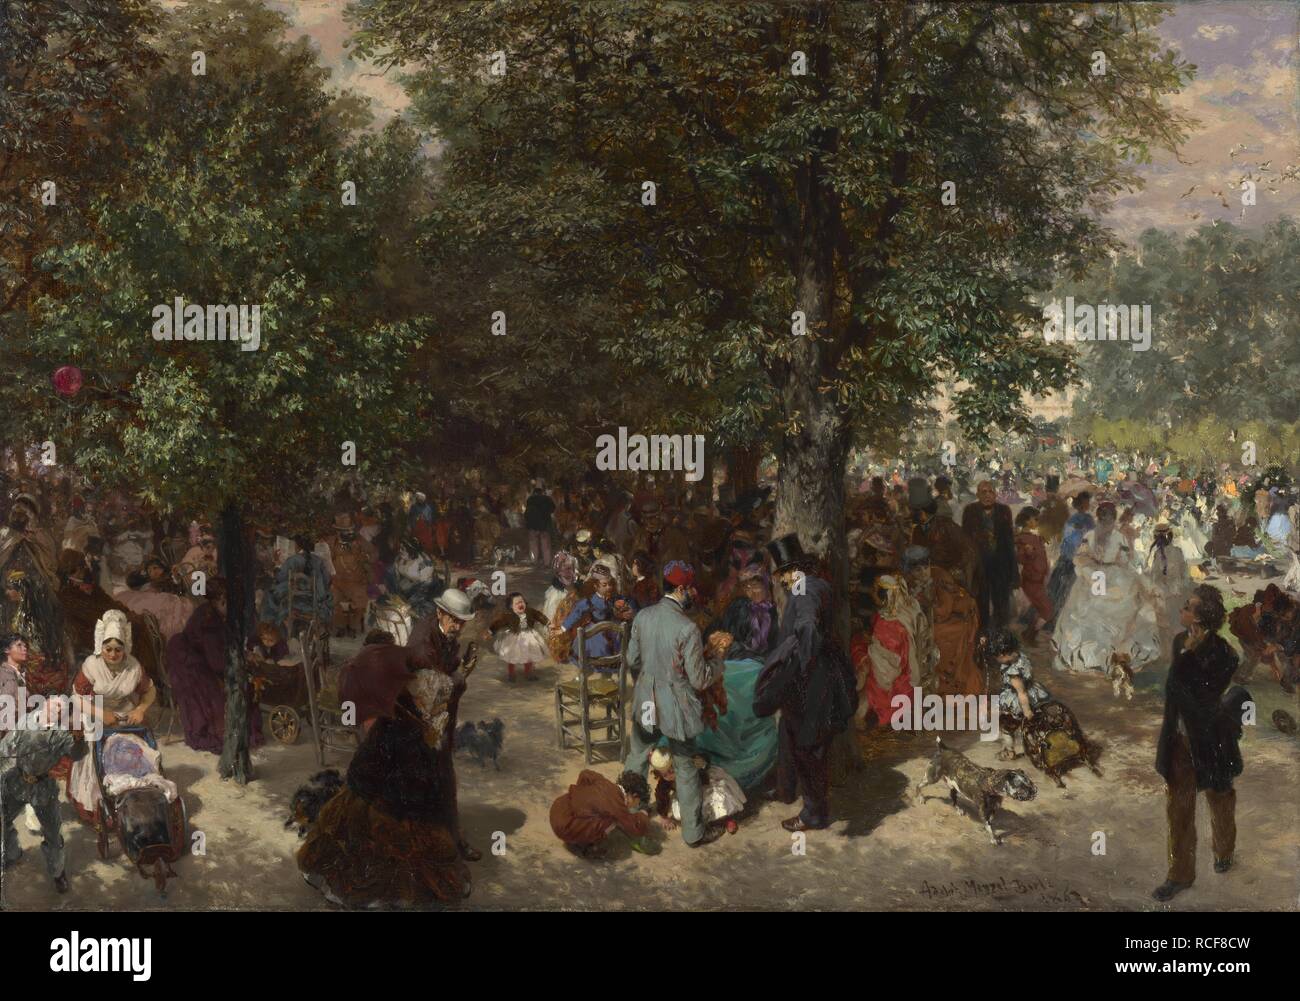 Afternoon in the Tuileries Gardens. Museum: National Gallery, London. Author: Menzel, Adolph Friedrich, von. Stock Photo